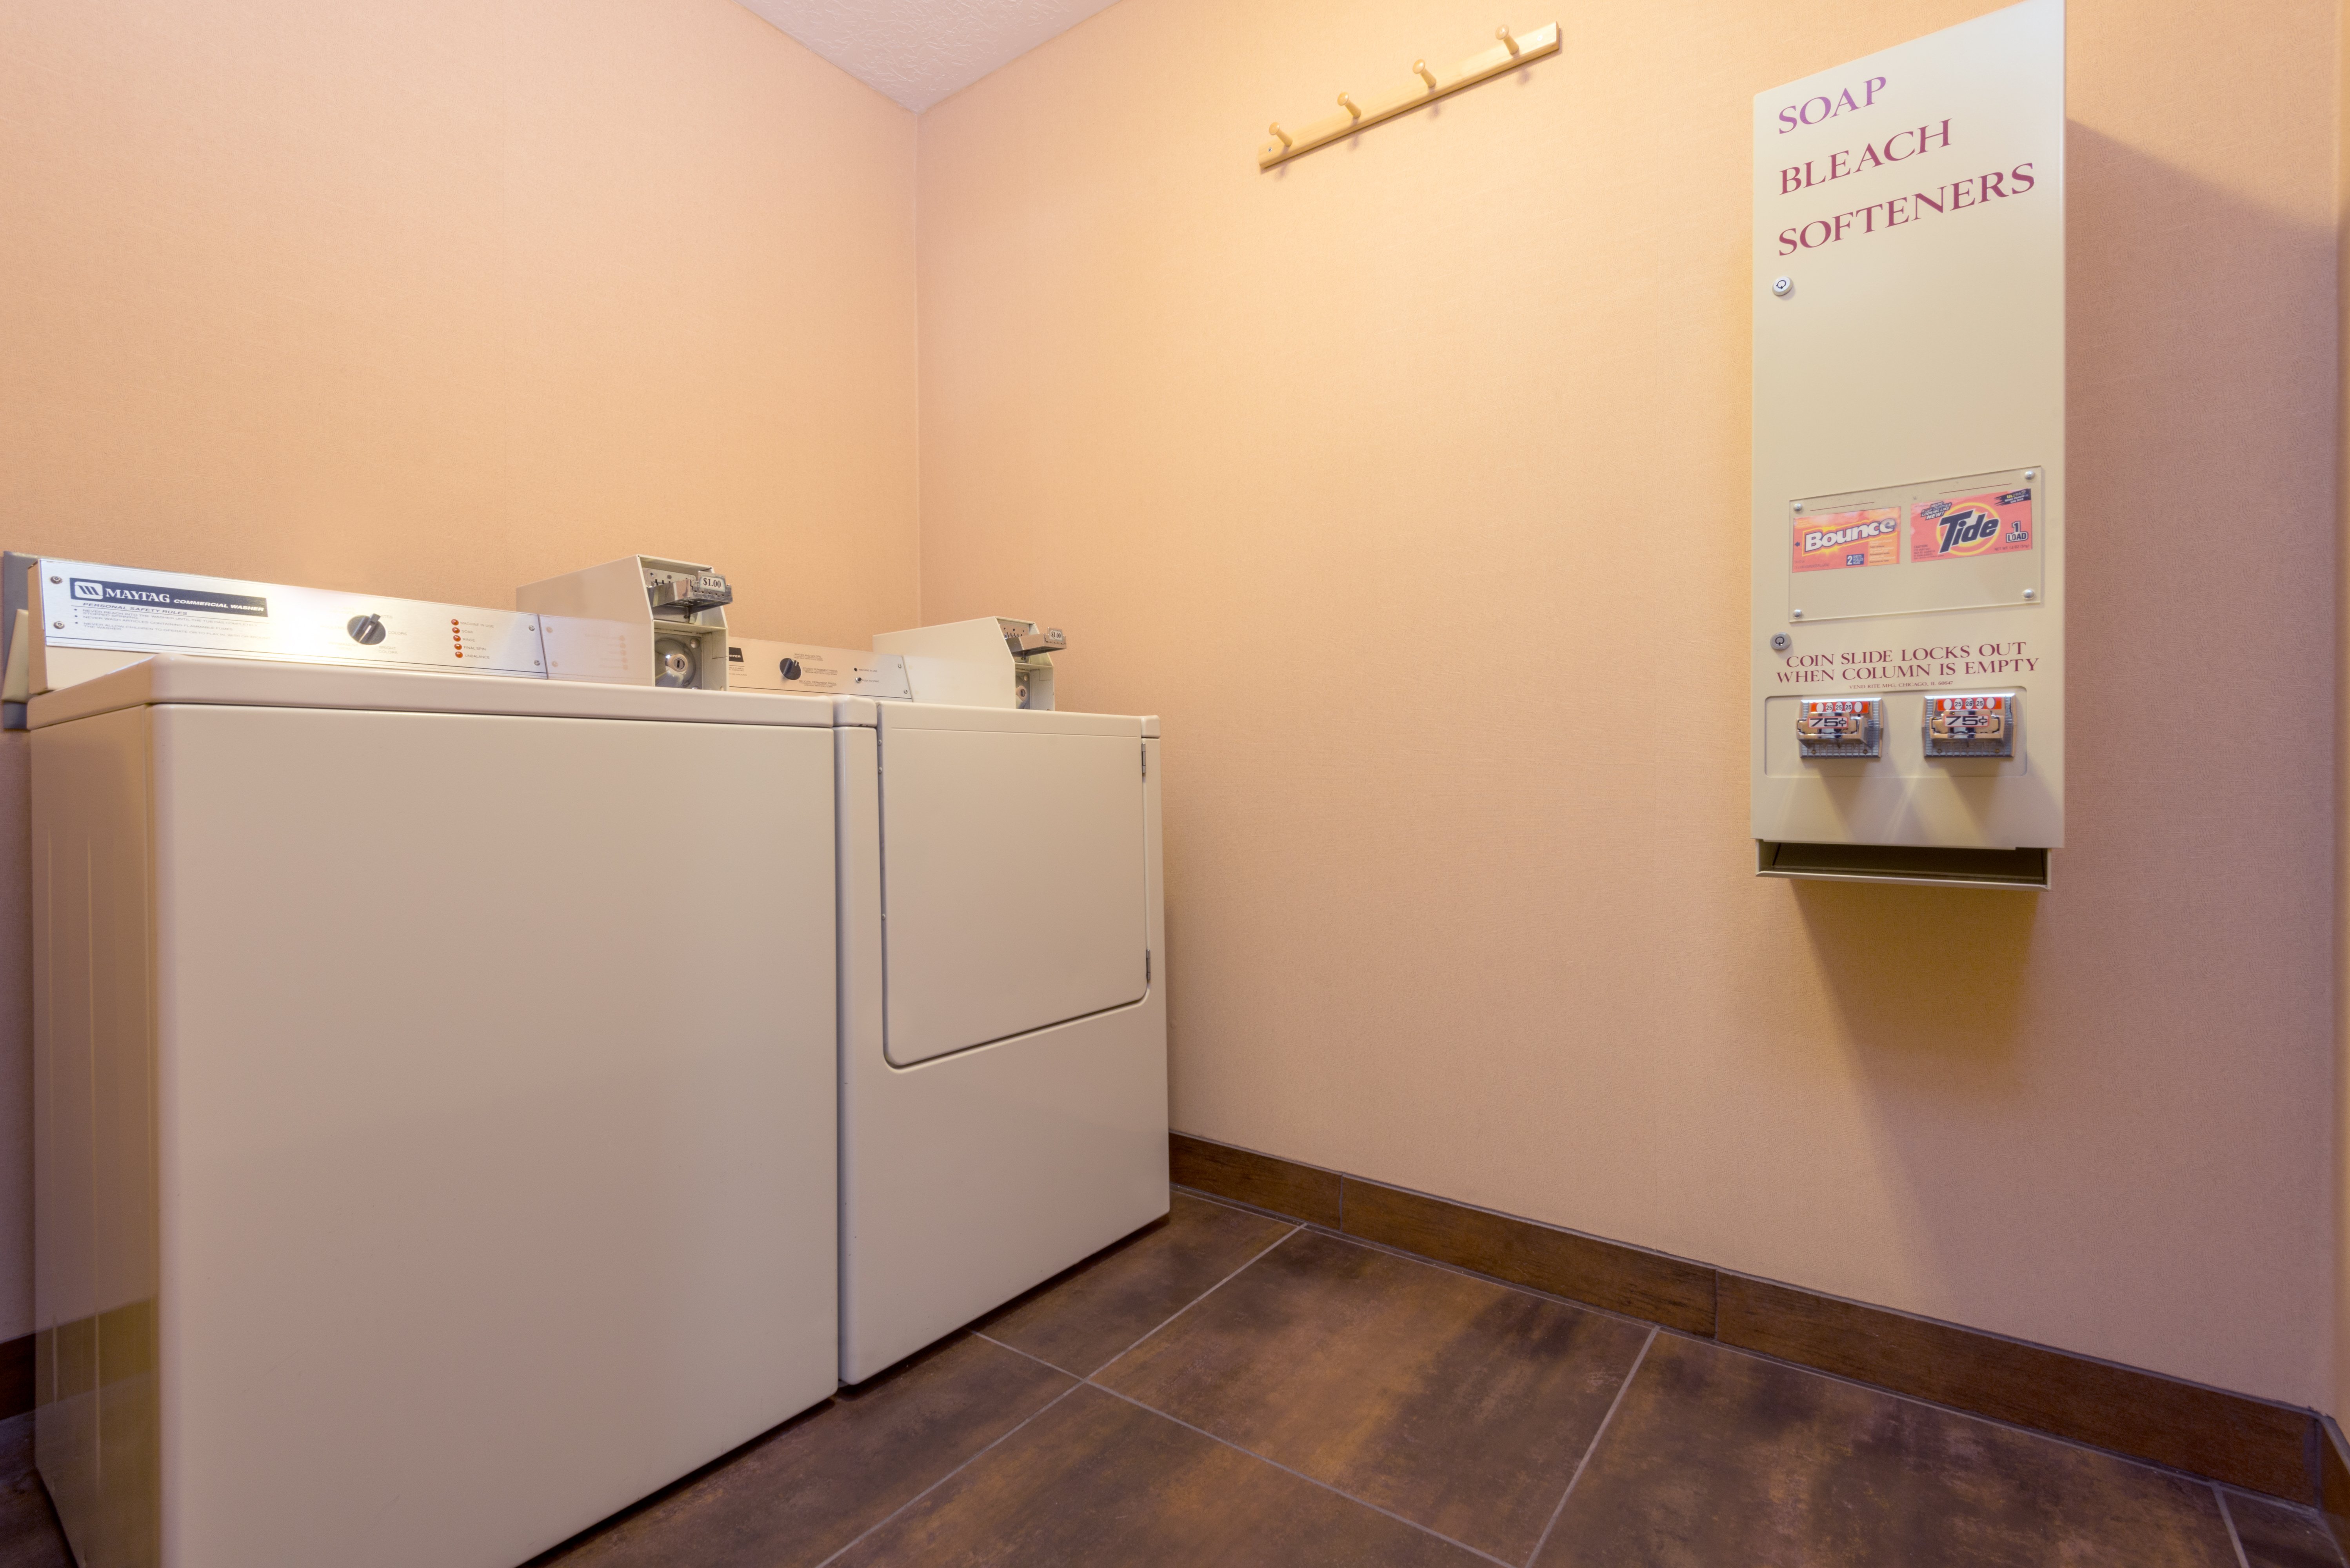 Guest Laundry Facilities available at our Raton NM hotel